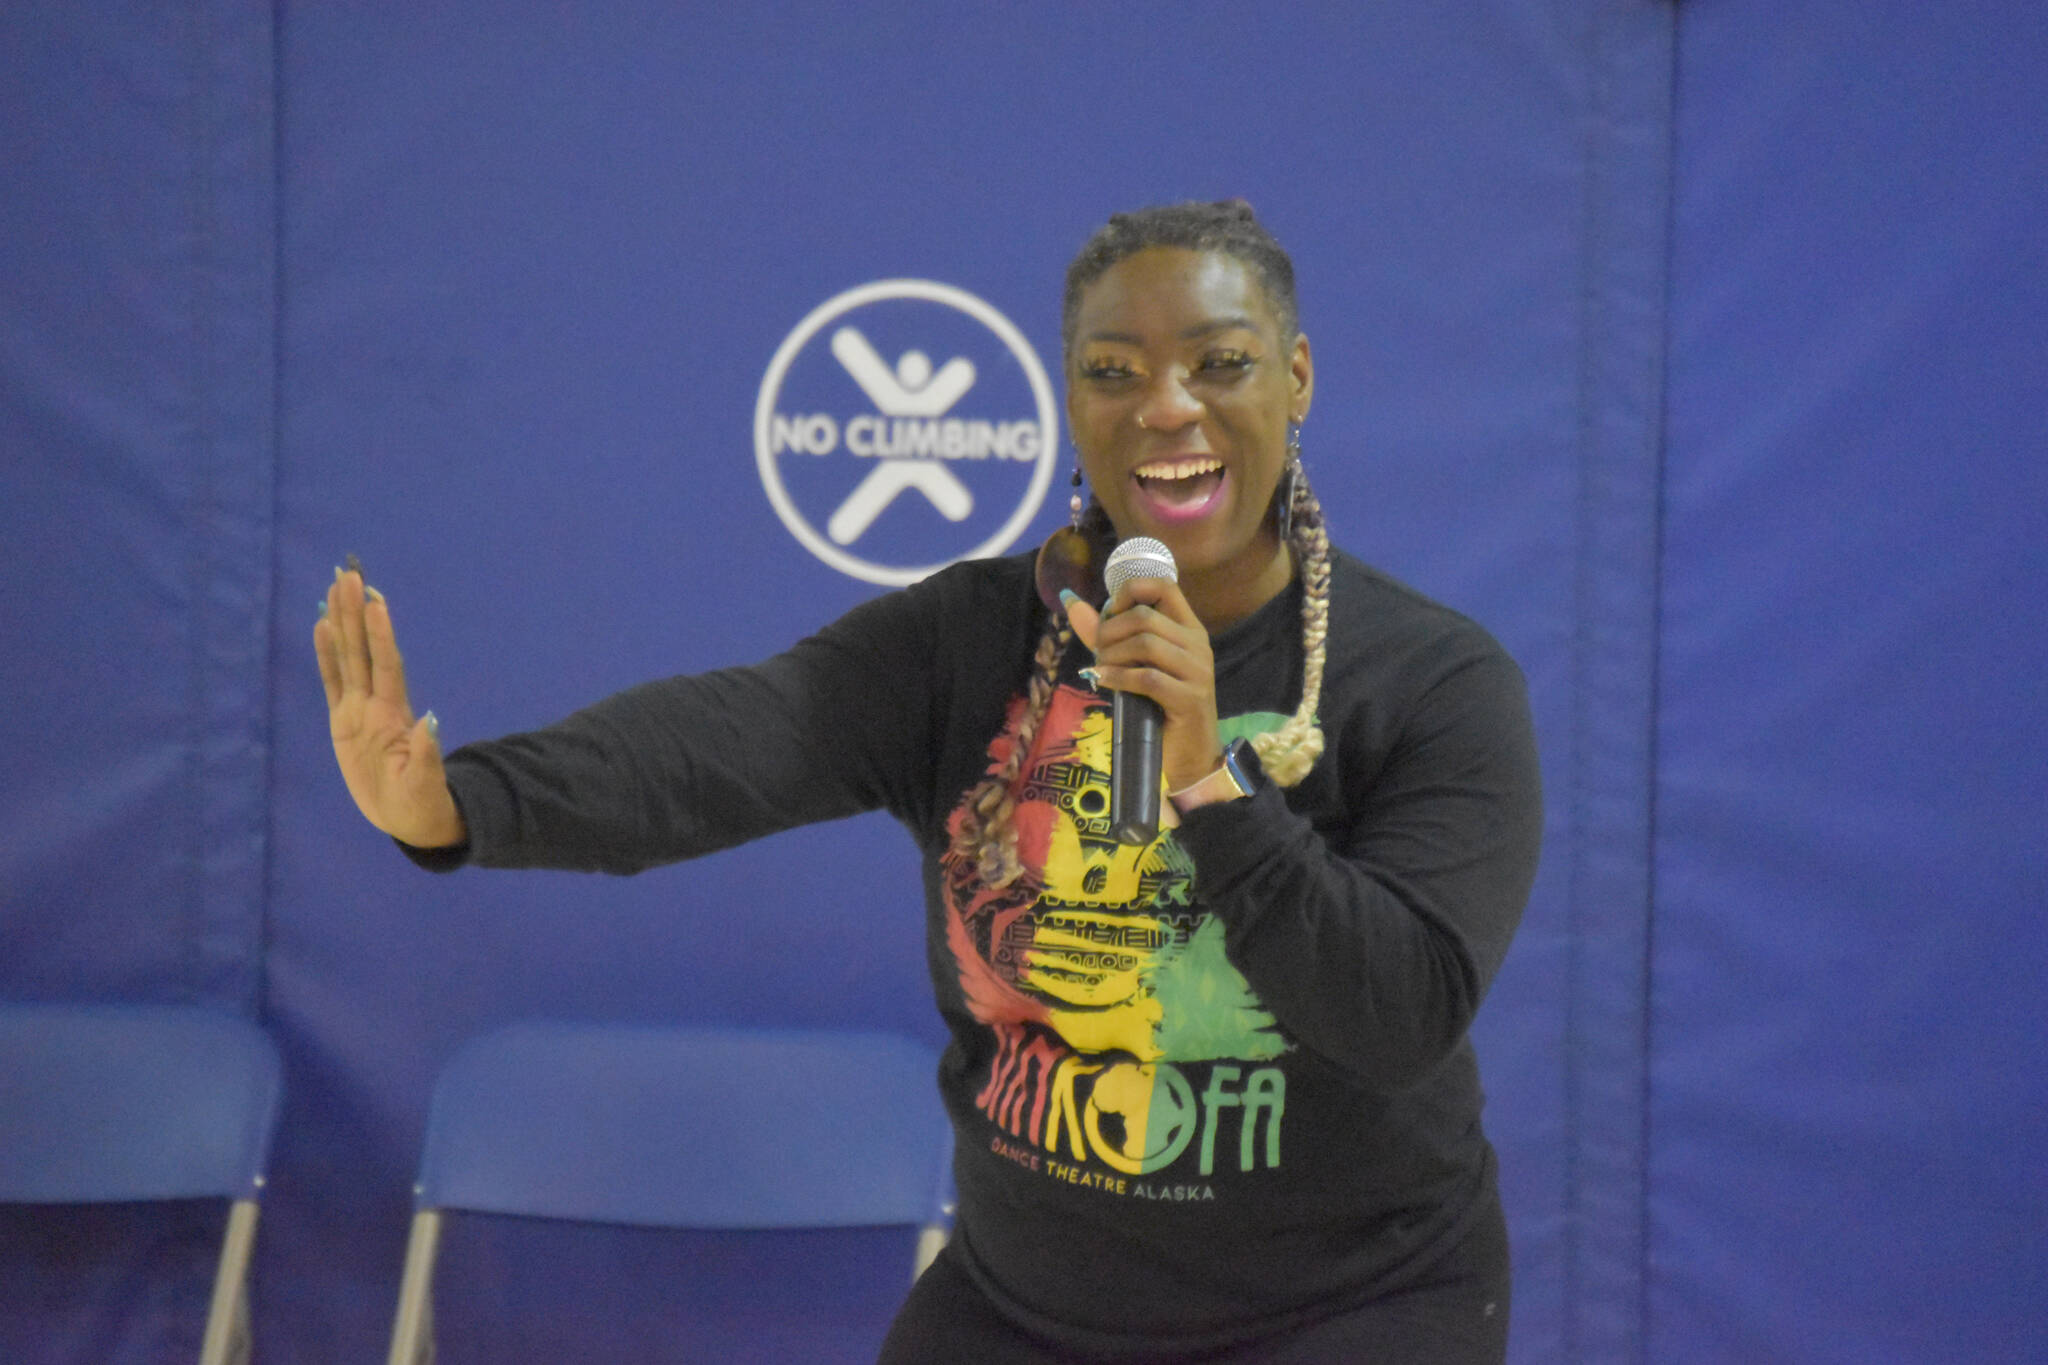 Misha Baskerville sings for a crowd of students during an opening performance by Sankofa Dance Theater Alaska at Kaleidoscope School of Arts and Science in Kenai, Alaska on Monday, March 20, 2023. (Jake Dye/Peninsula Clarion)